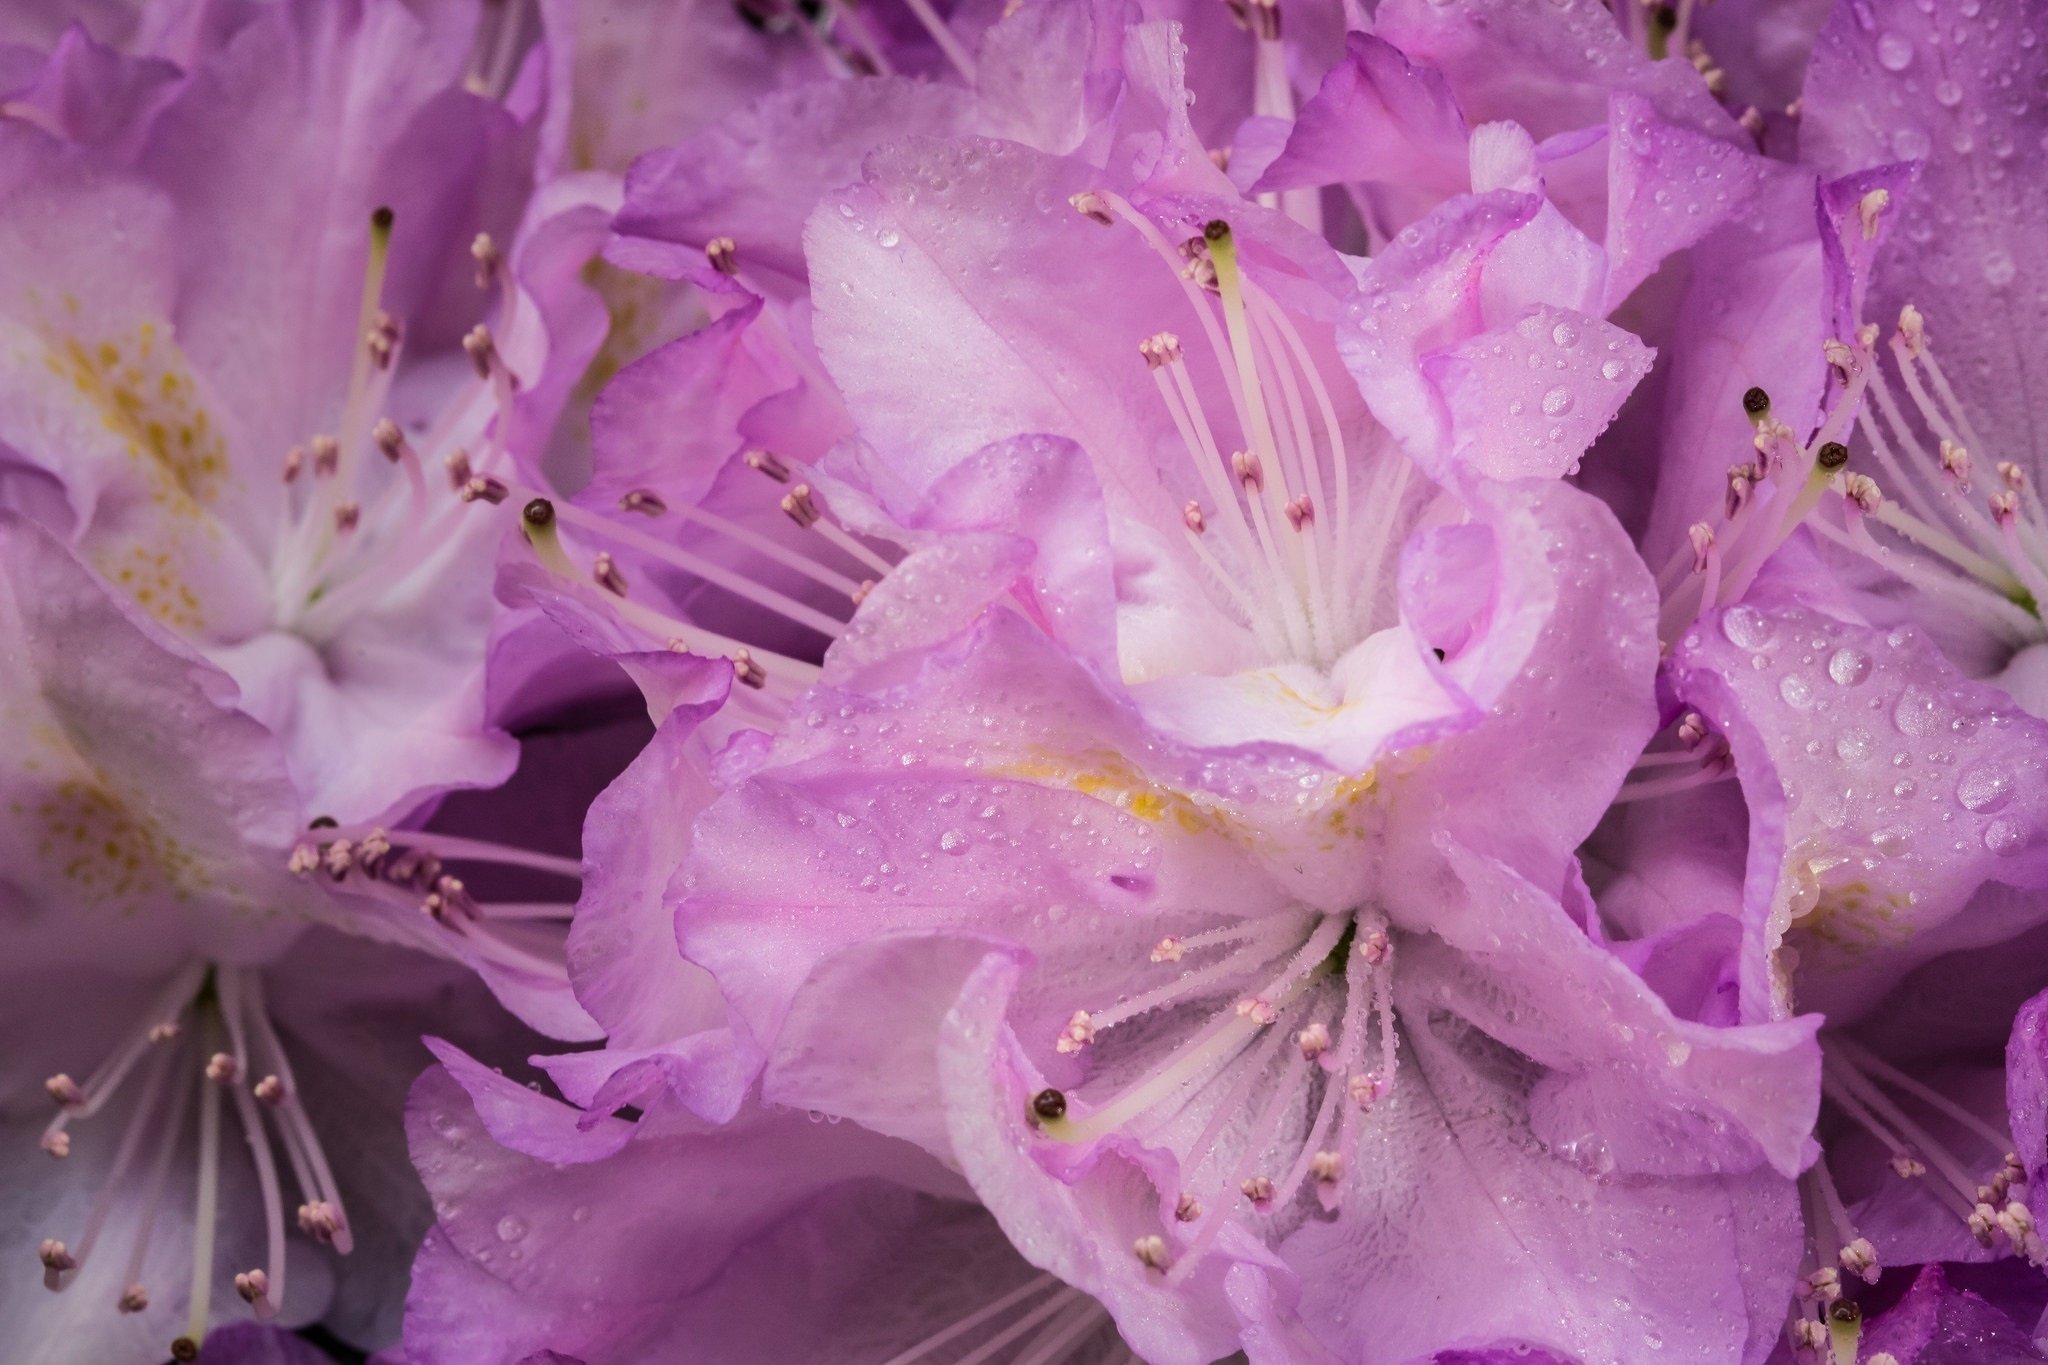 rhododendrons, Flowers, Pink, Bright, Color, Petals, Drops, Many, Macro Wallpaper